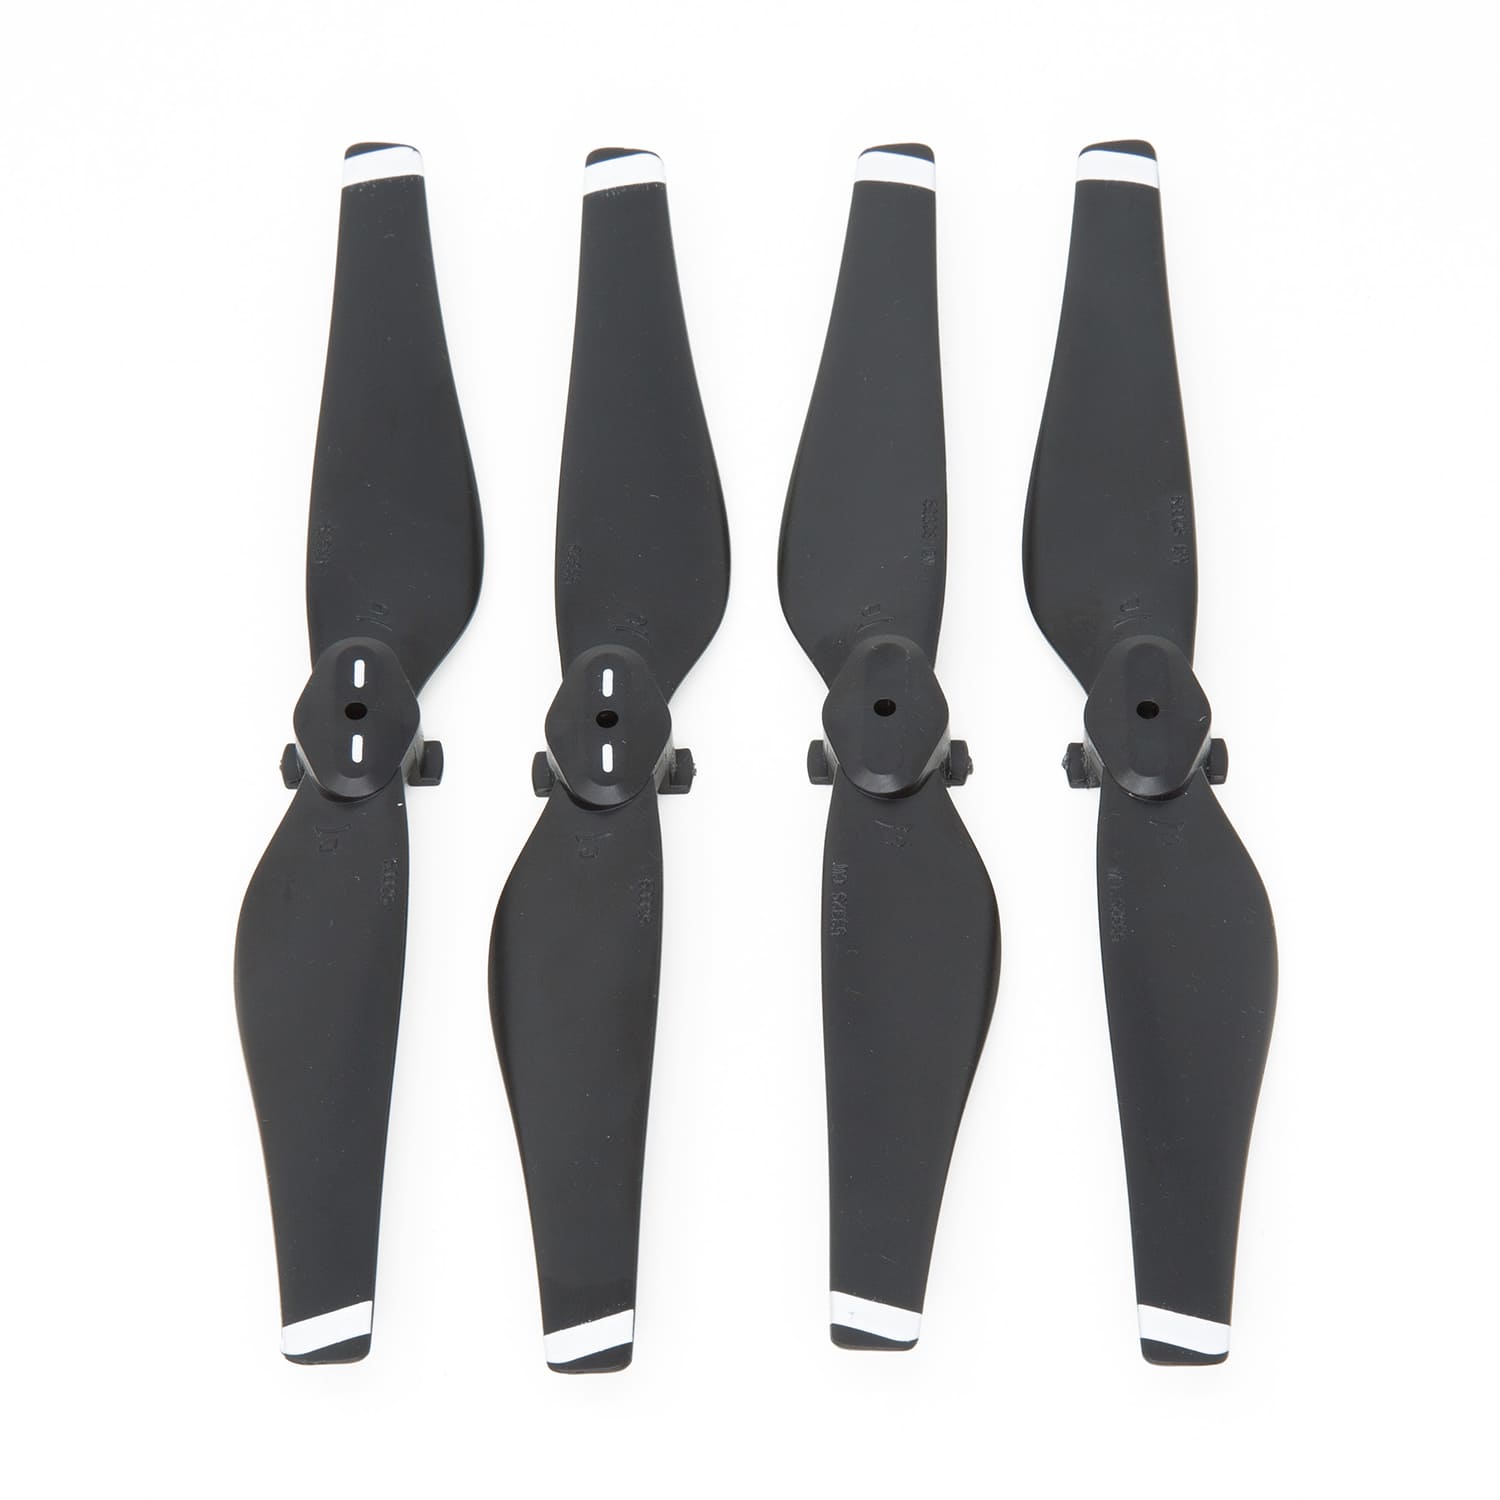 2 Pairs 5332S (CW/CCW) Quick Release Propellers for DJI Mavic Air (Grey with White Stripe)